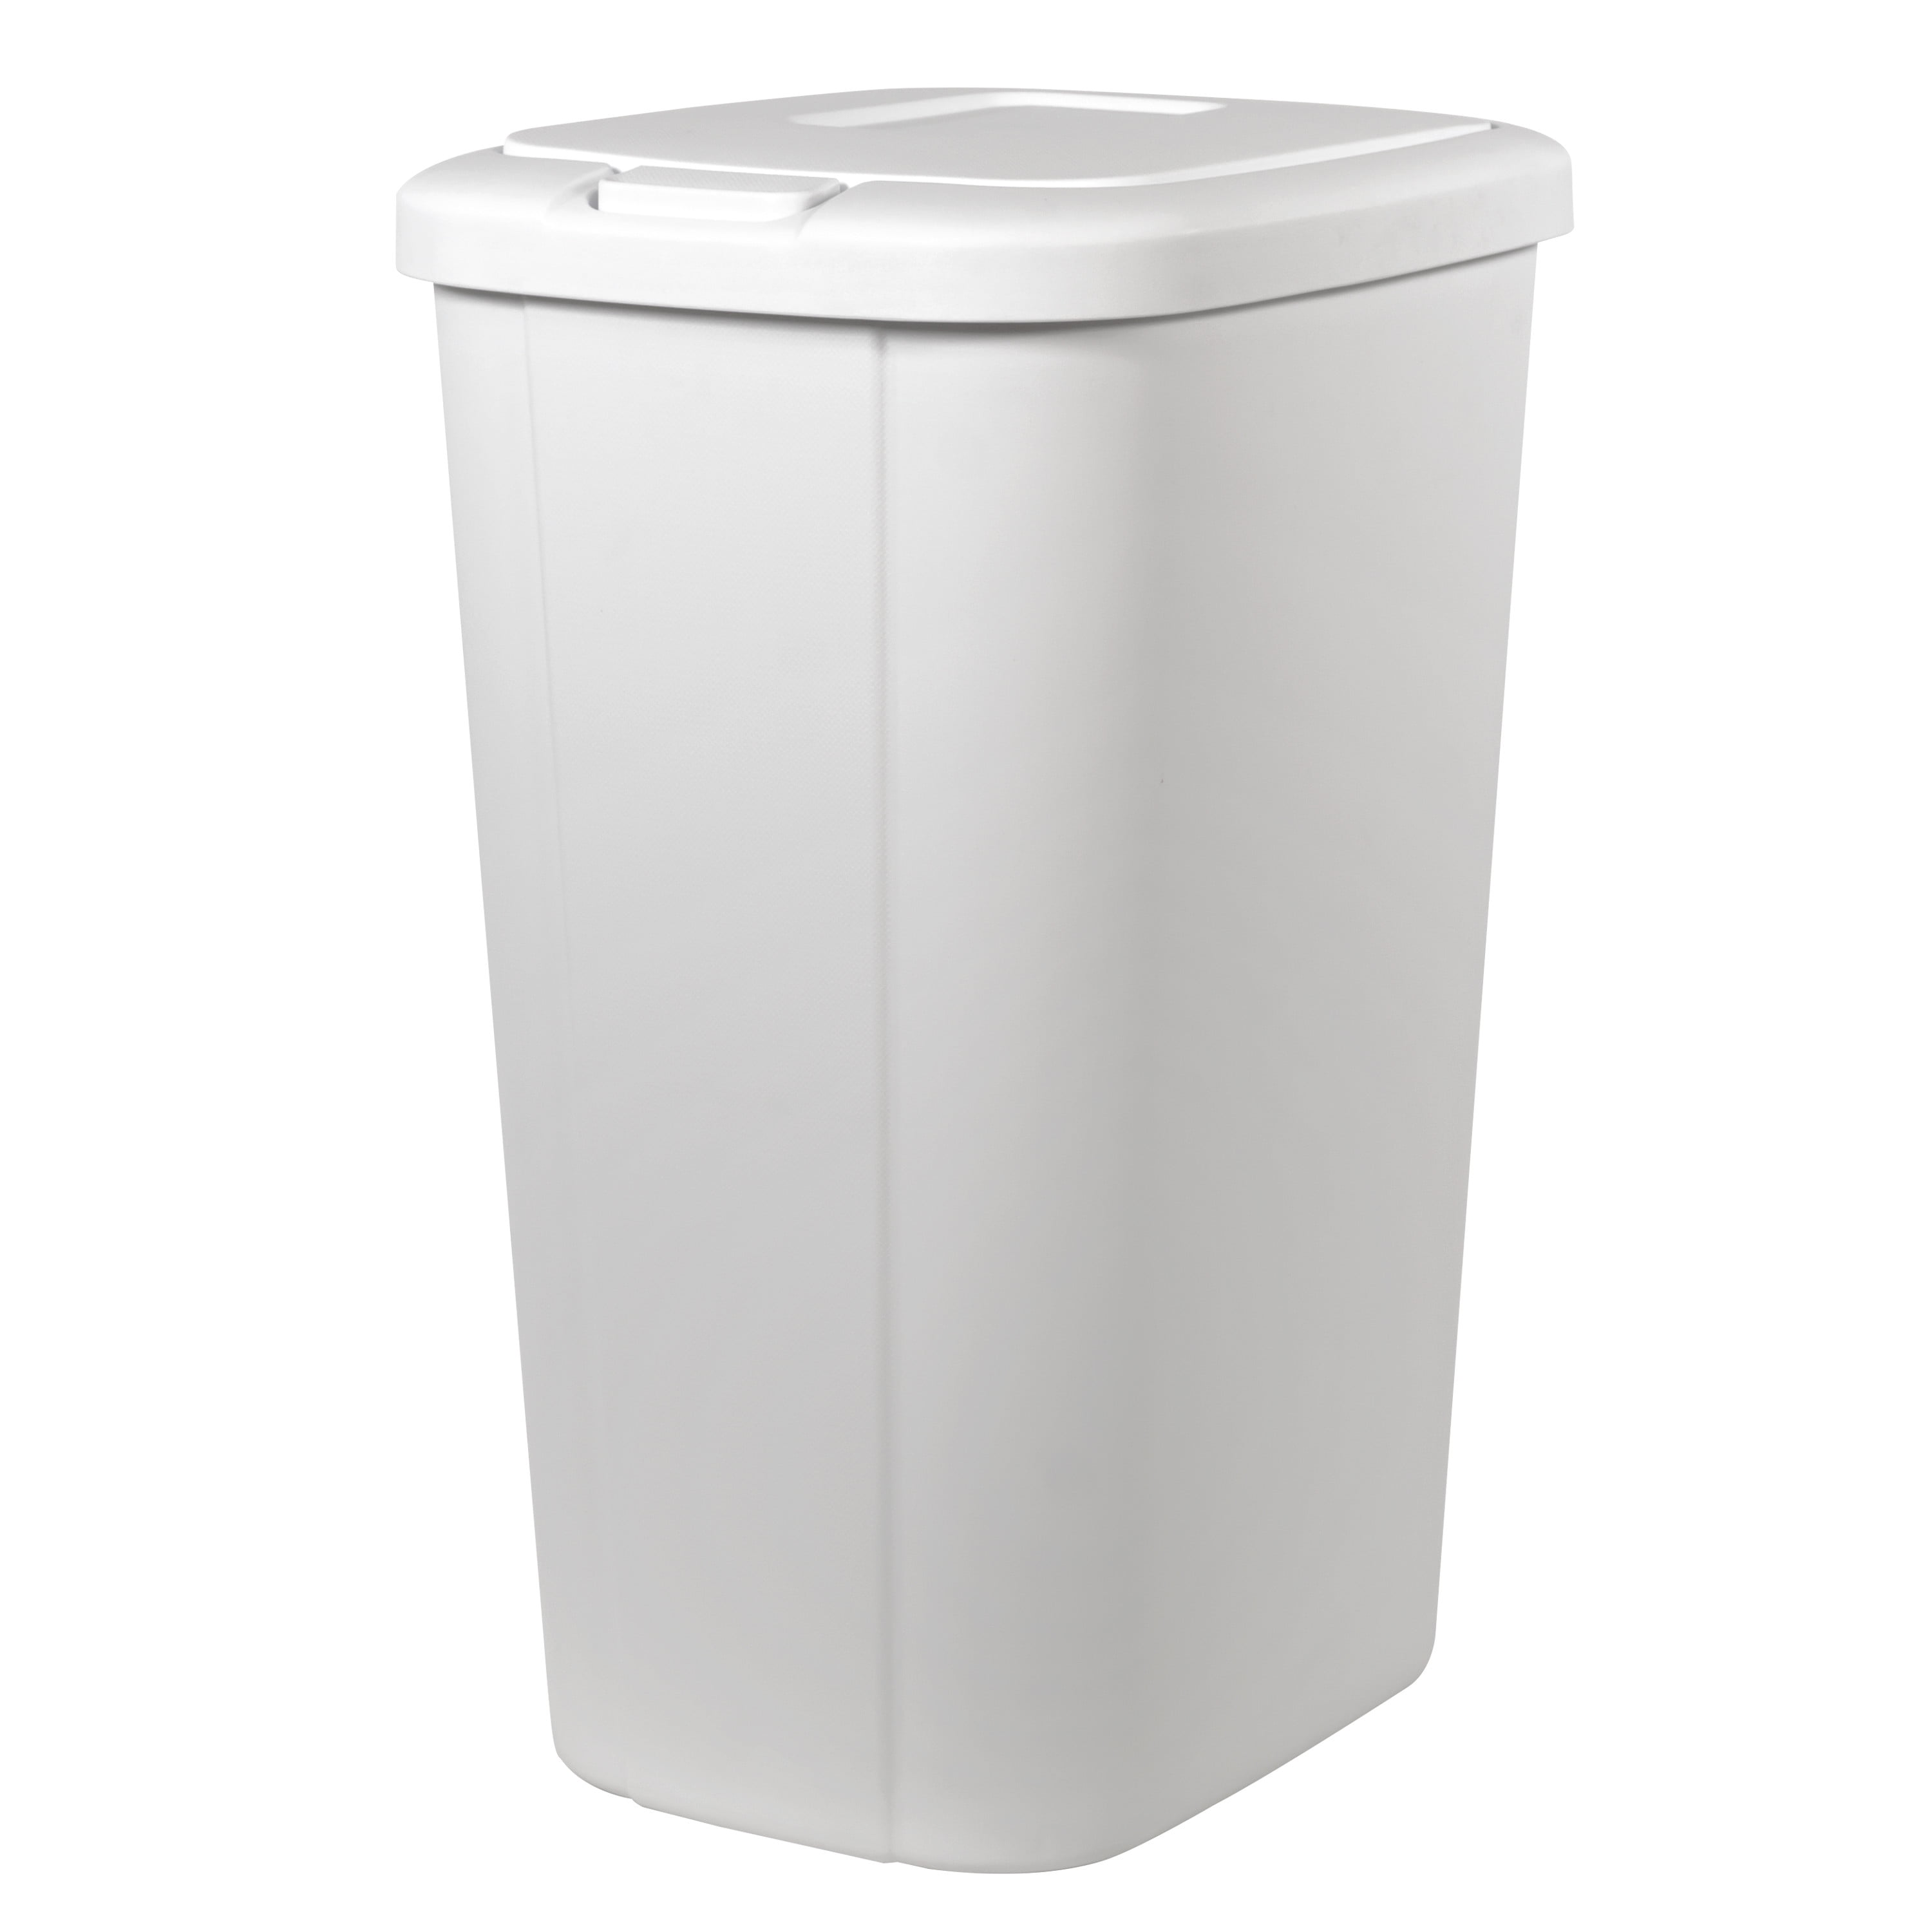 Details about   13.3-gal Touch Lid Trash Can Black or White w/ Decorative Texture Home Kitchen 